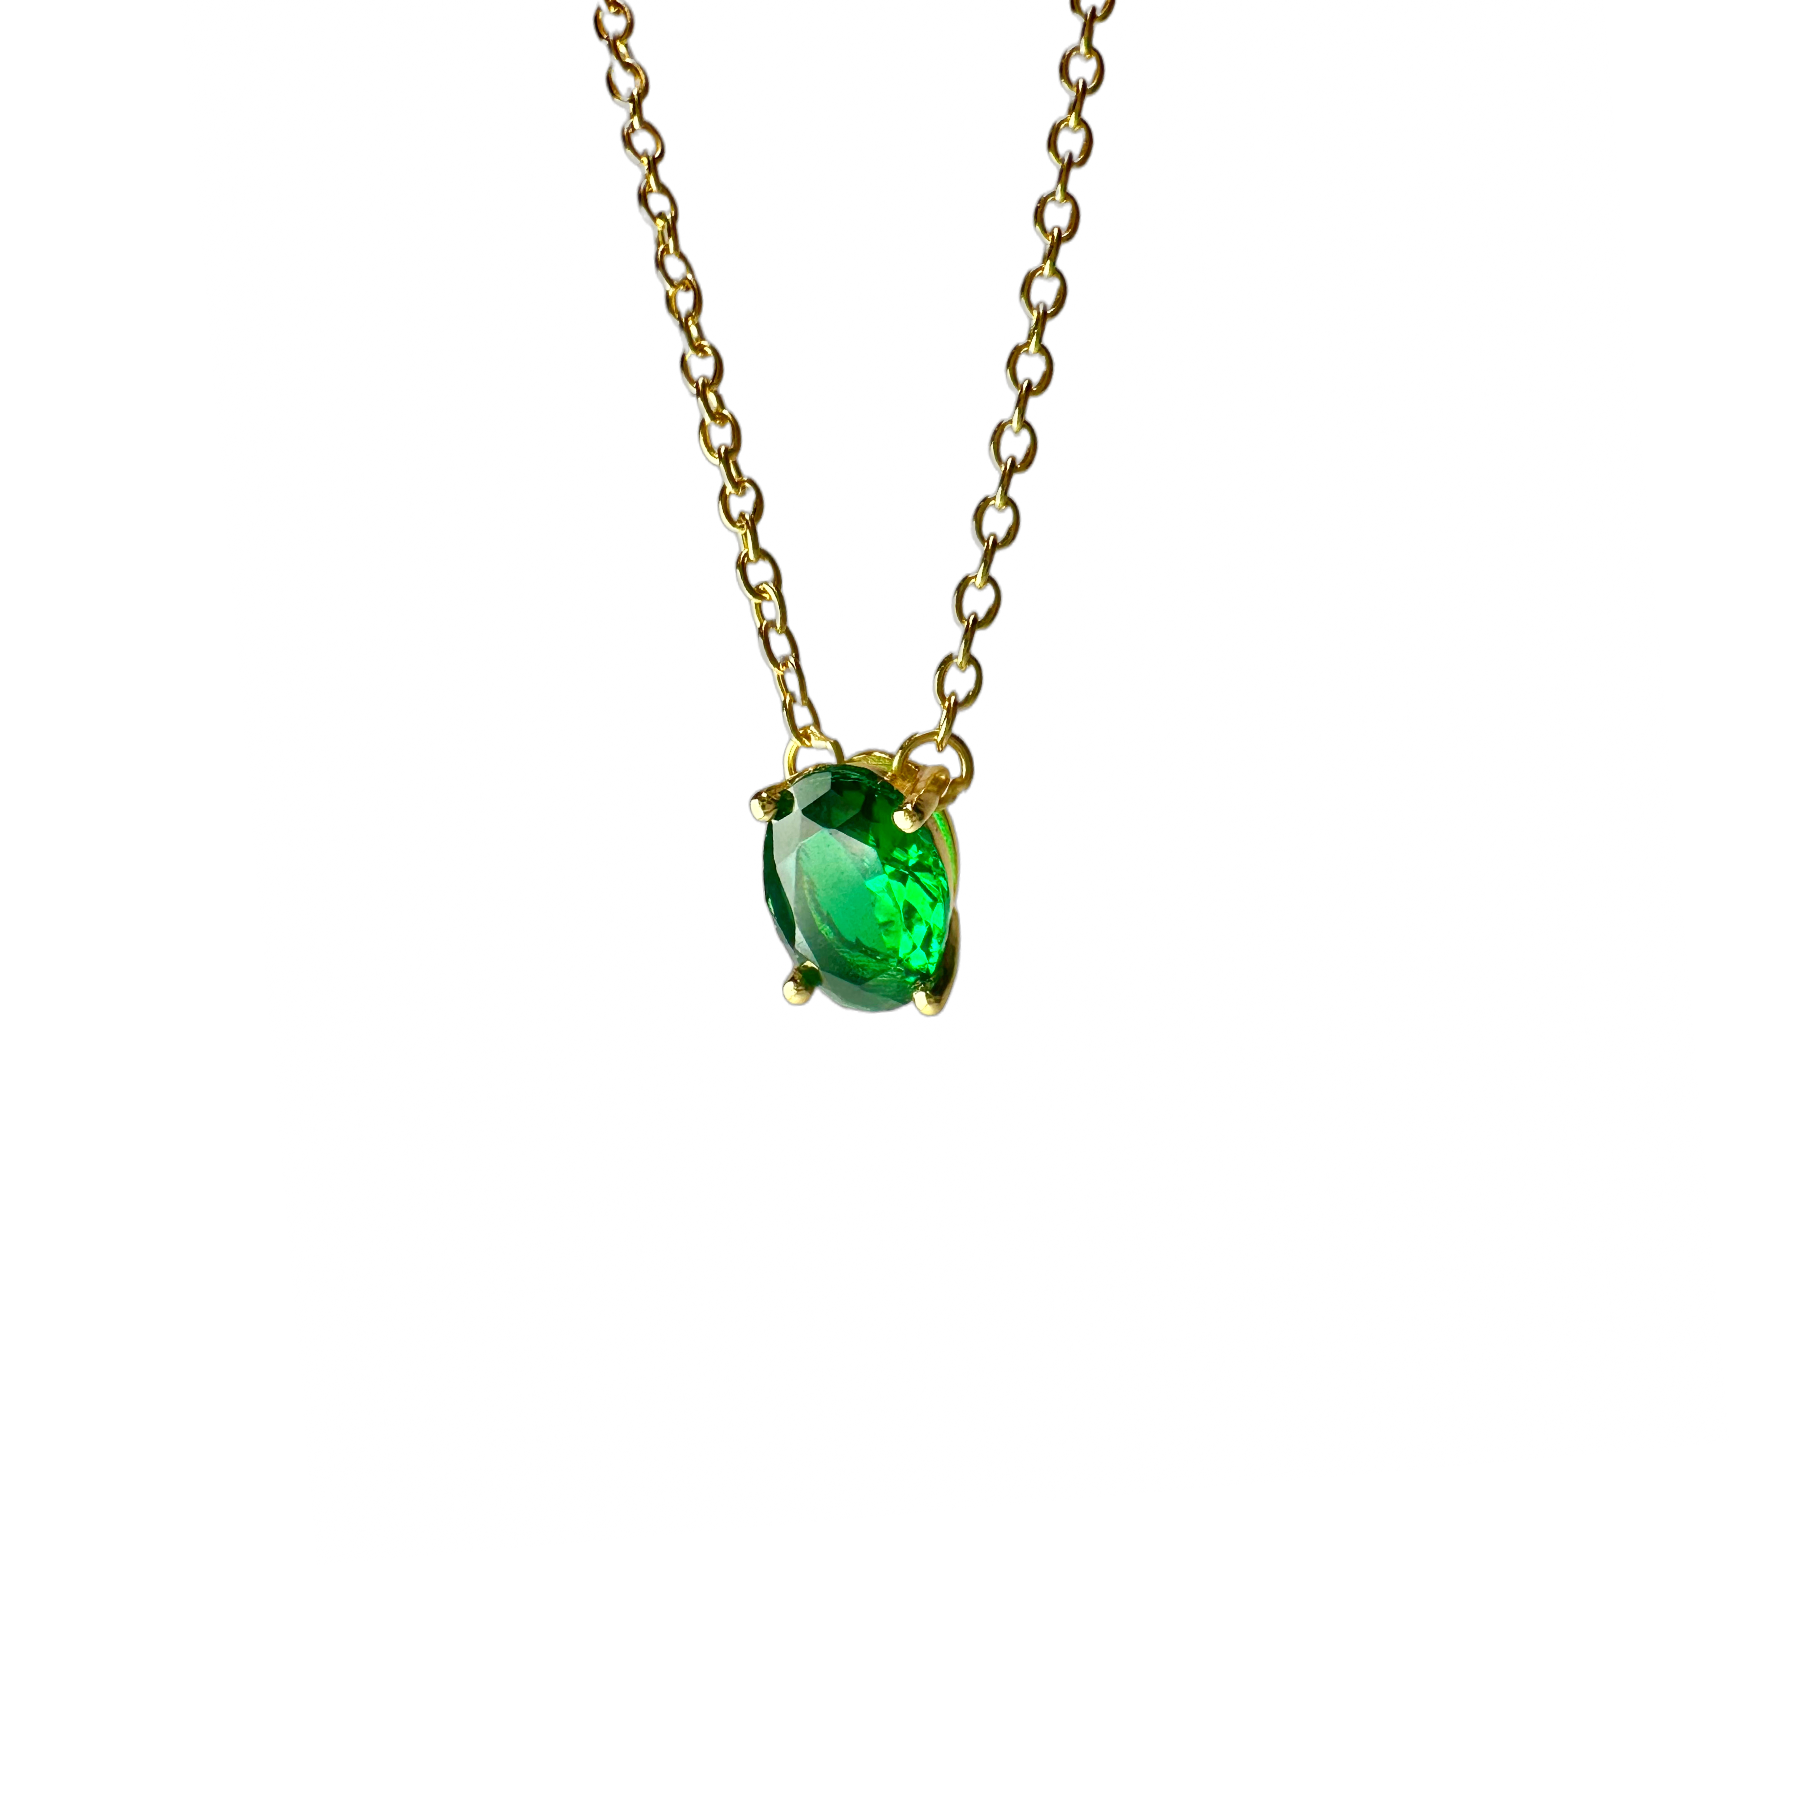 Green Oval Stone Pendant Necklace